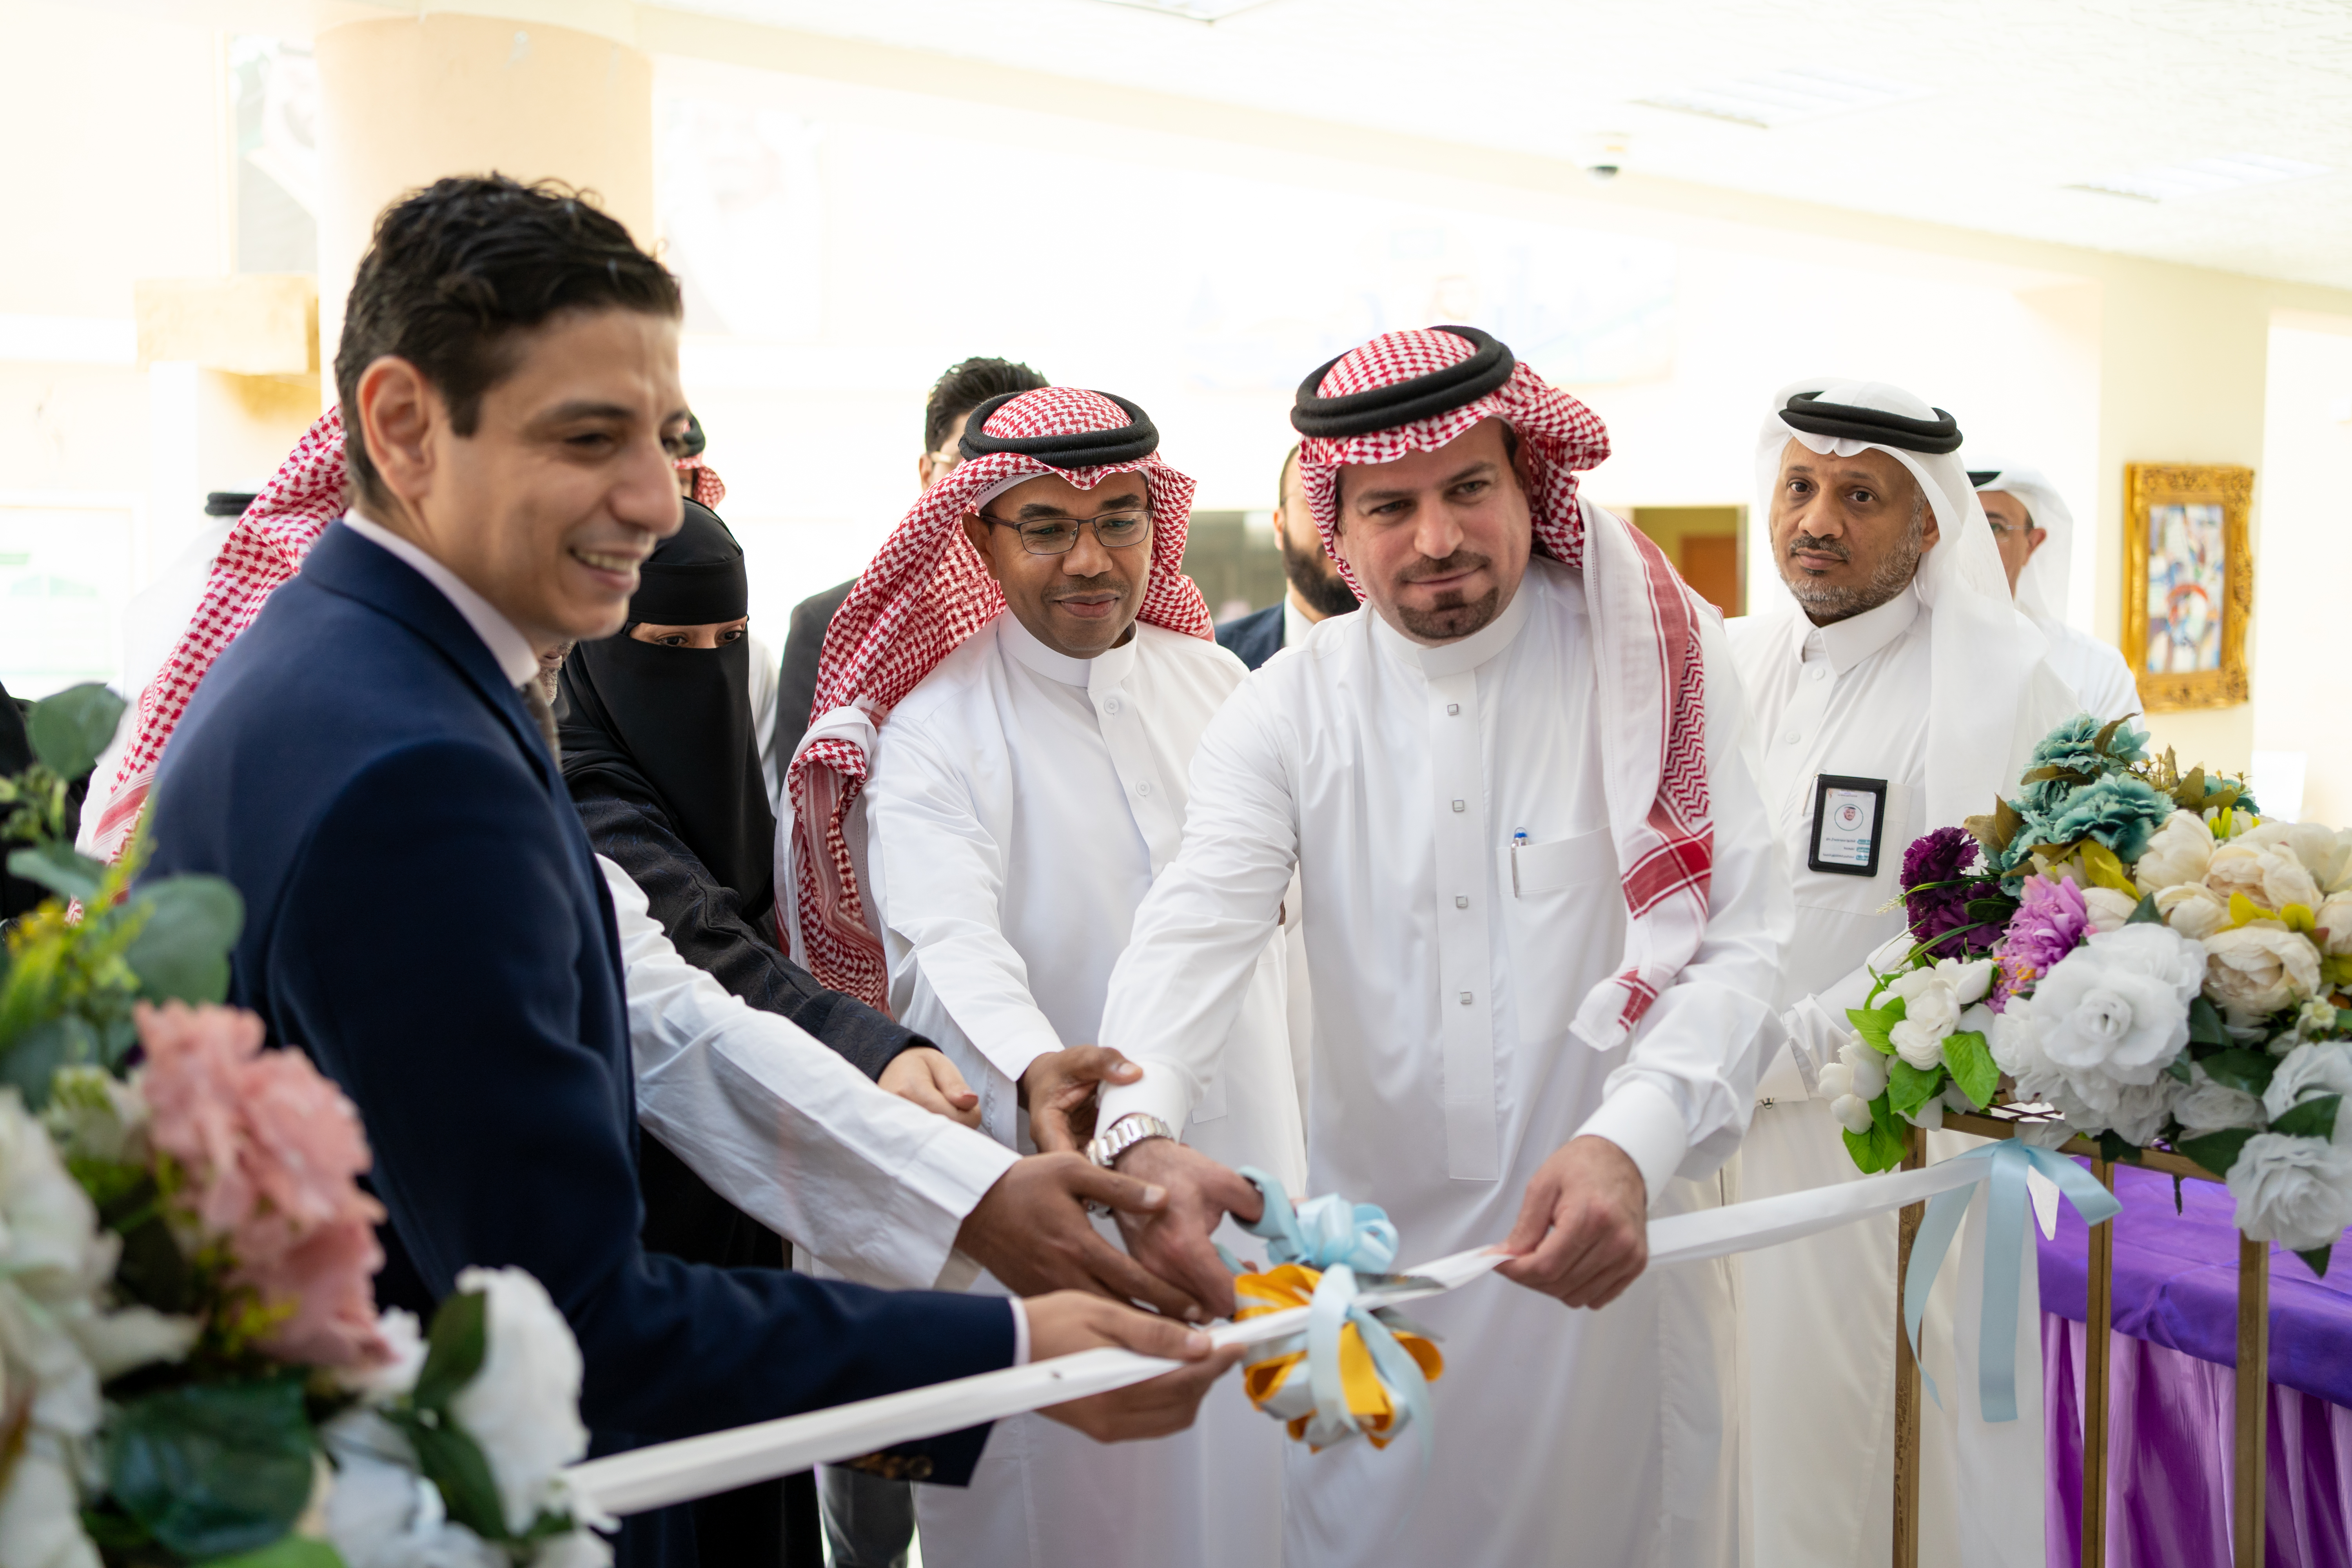 Corporation initiative between Andalusia and the administration of Jeddah Education